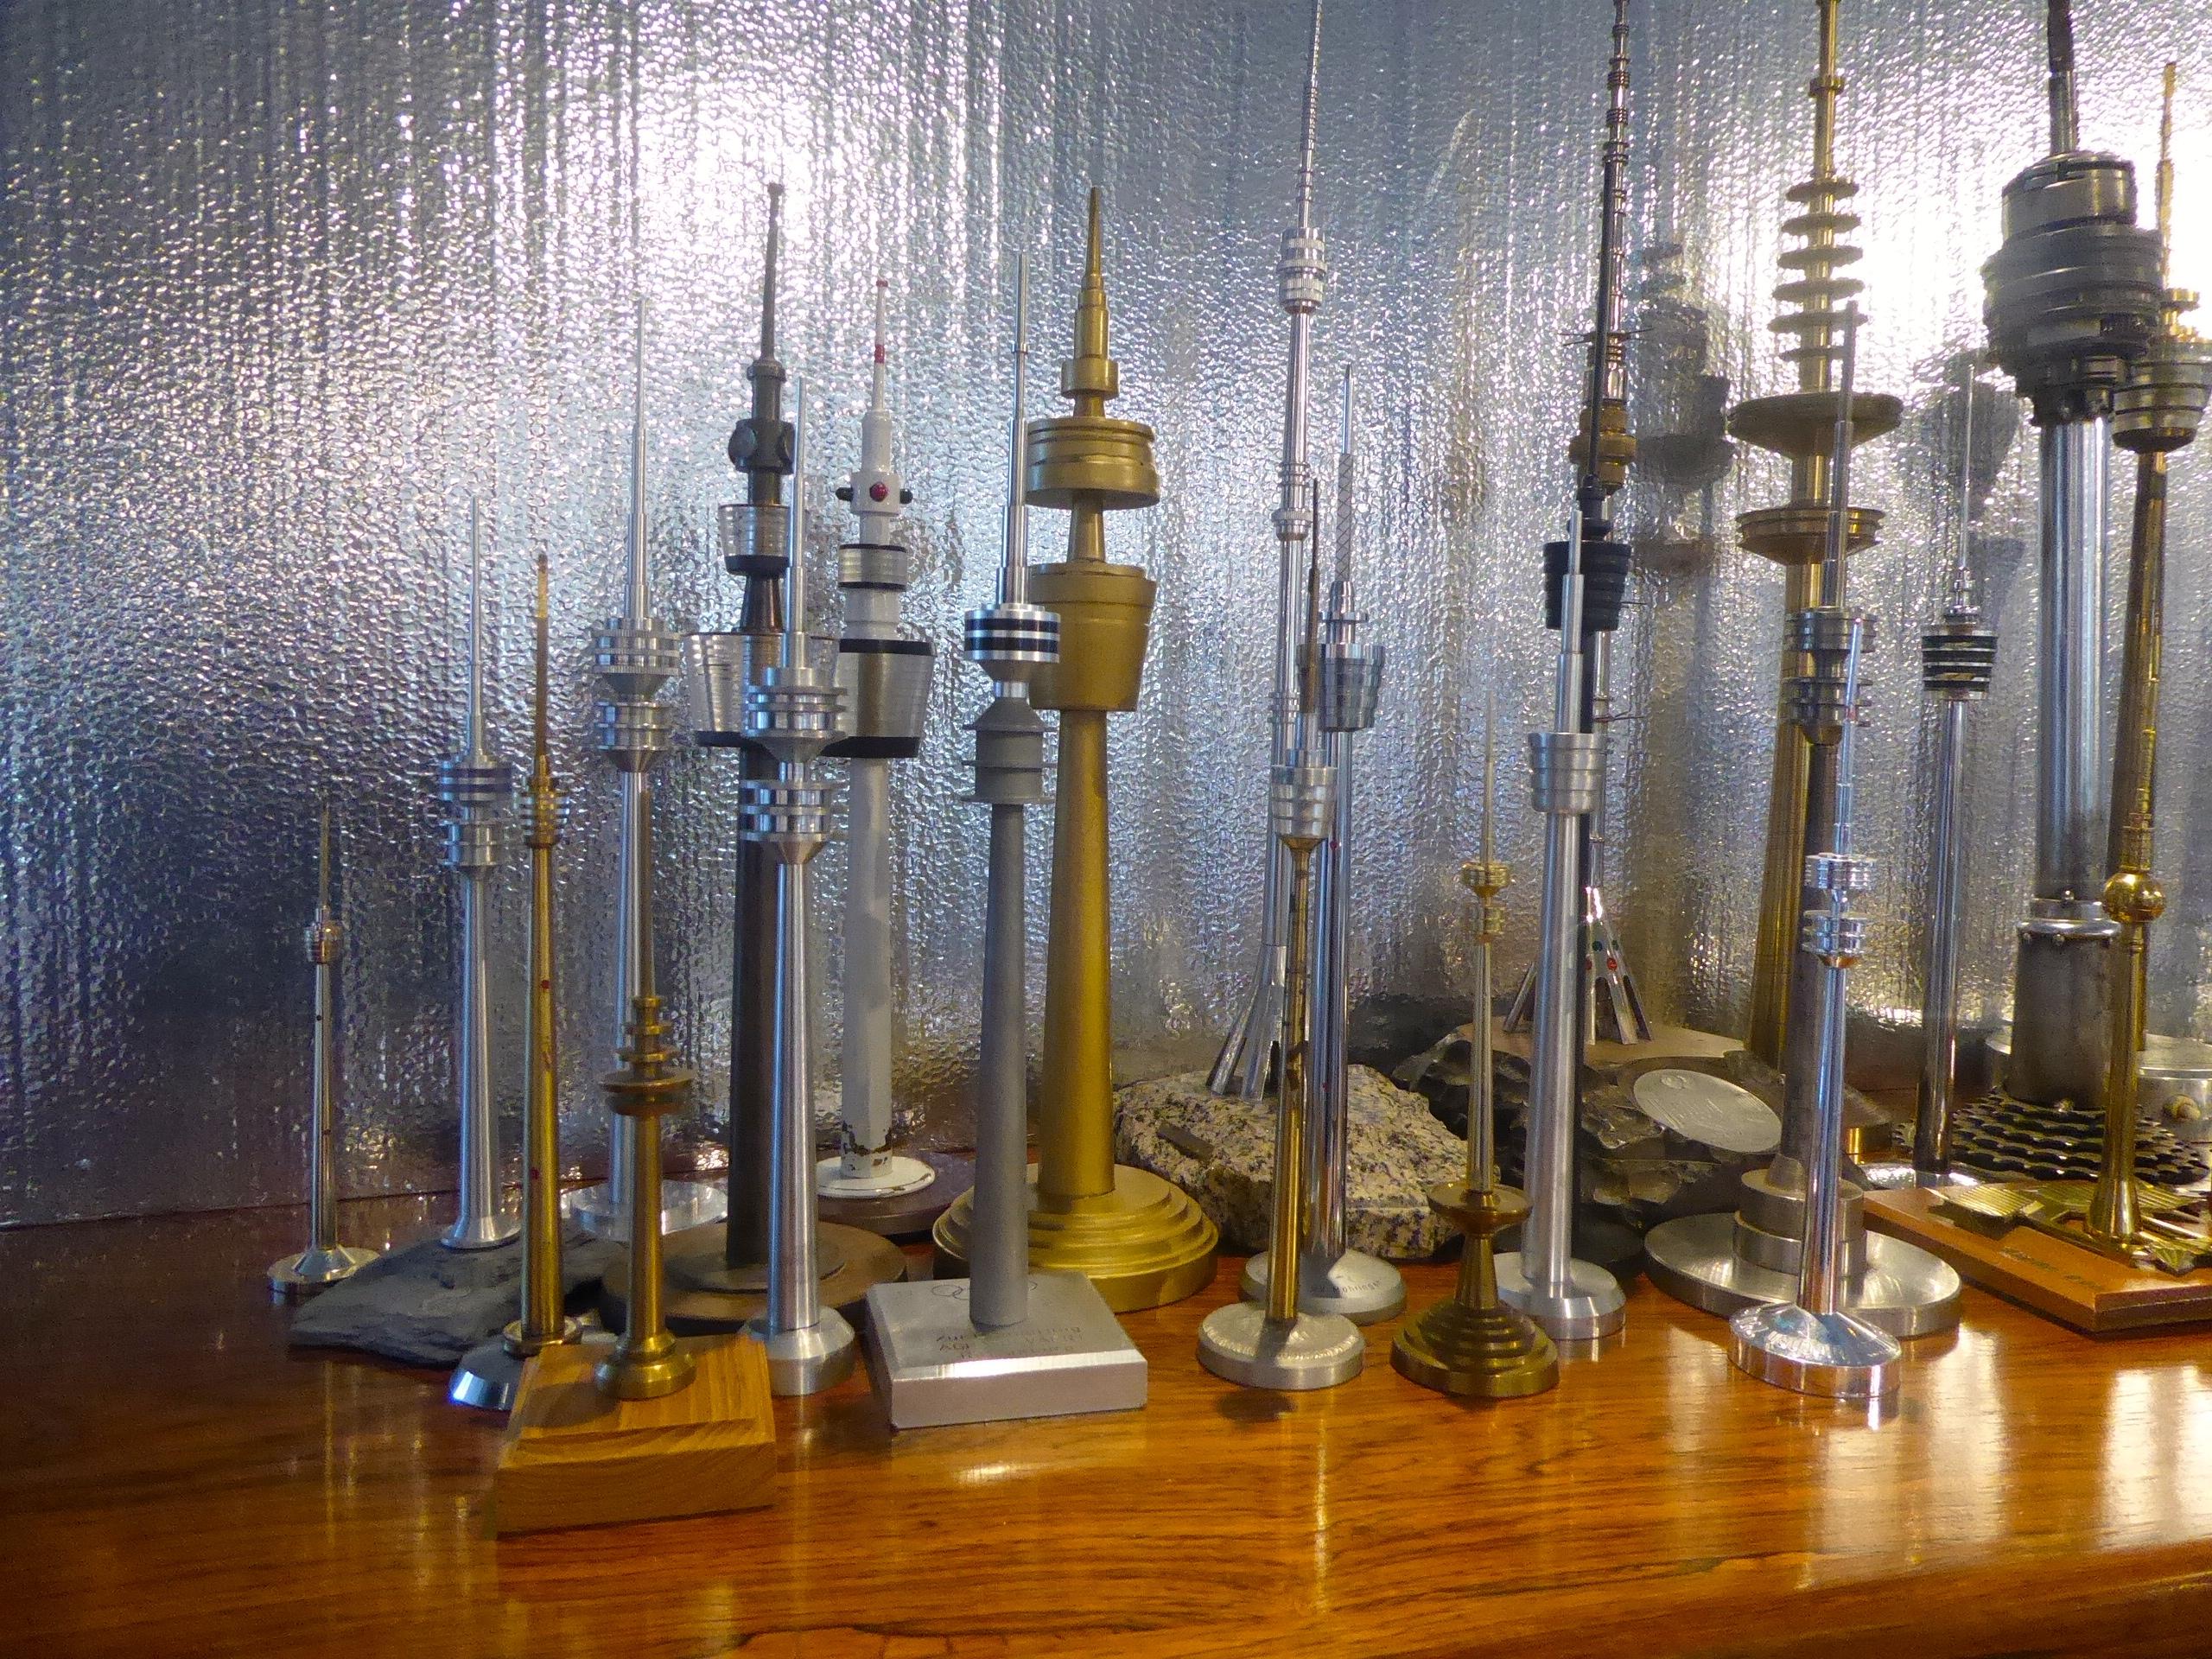 A grand set of 50 vintage European midcentury transmission tower replicas, circa 1950s-1980s. Many of these were handmade by engineering students to prove their skills on the lathe, using various materials like steel, aluminum, bronze, brass and